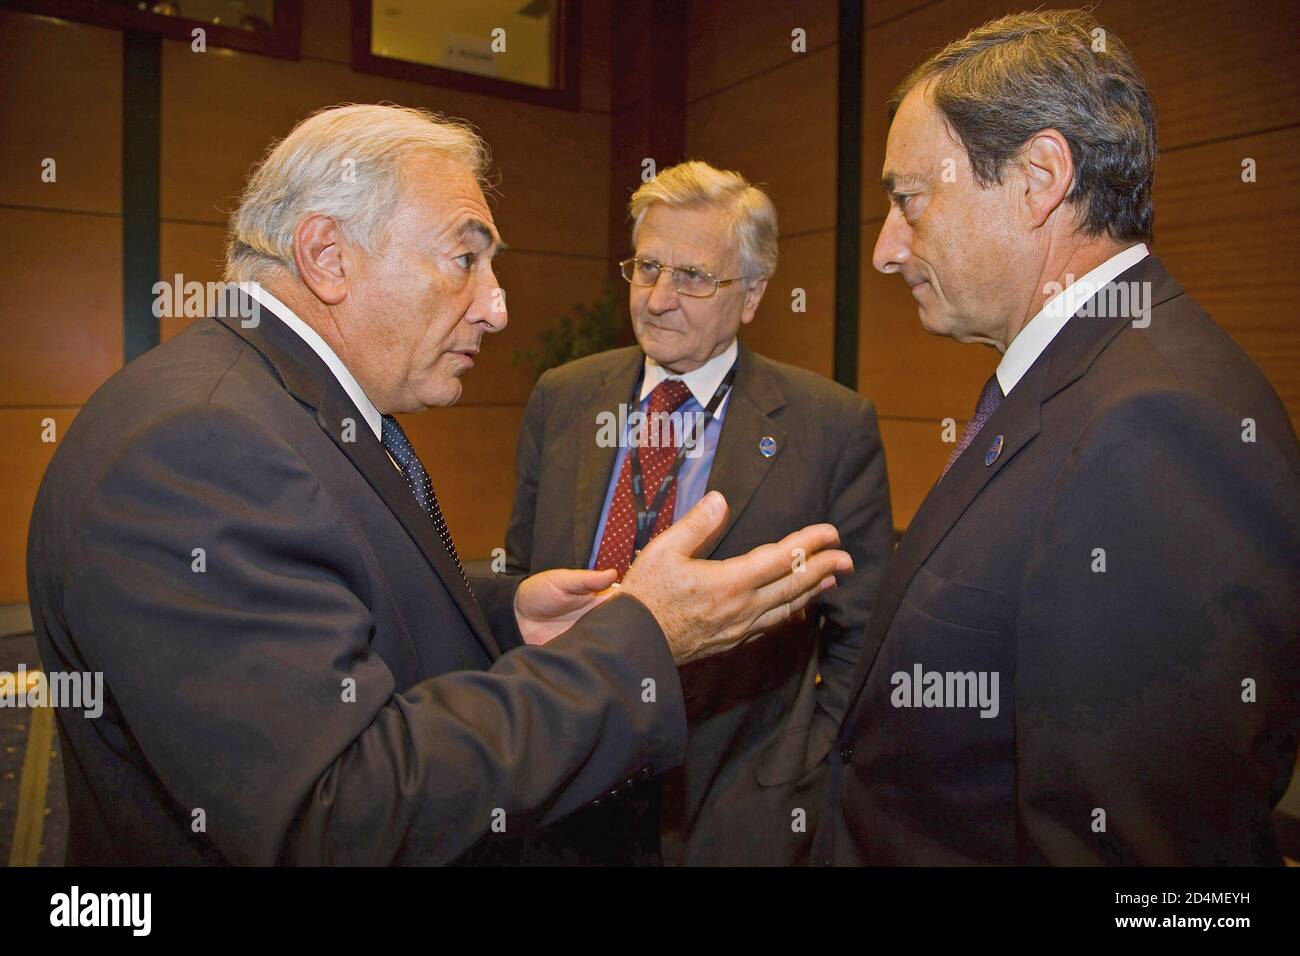 International Monetary Fund's Managing Director Dominique Strauss-Kahn (L) talks with  European Central Bank President Jean-Claude Trichet (C) and Italy's Governor Mario Draghi (R) prior to the start of their G-7 meeting at the Istanbul Congress Center ca.  3 October 2009 Stock Photo